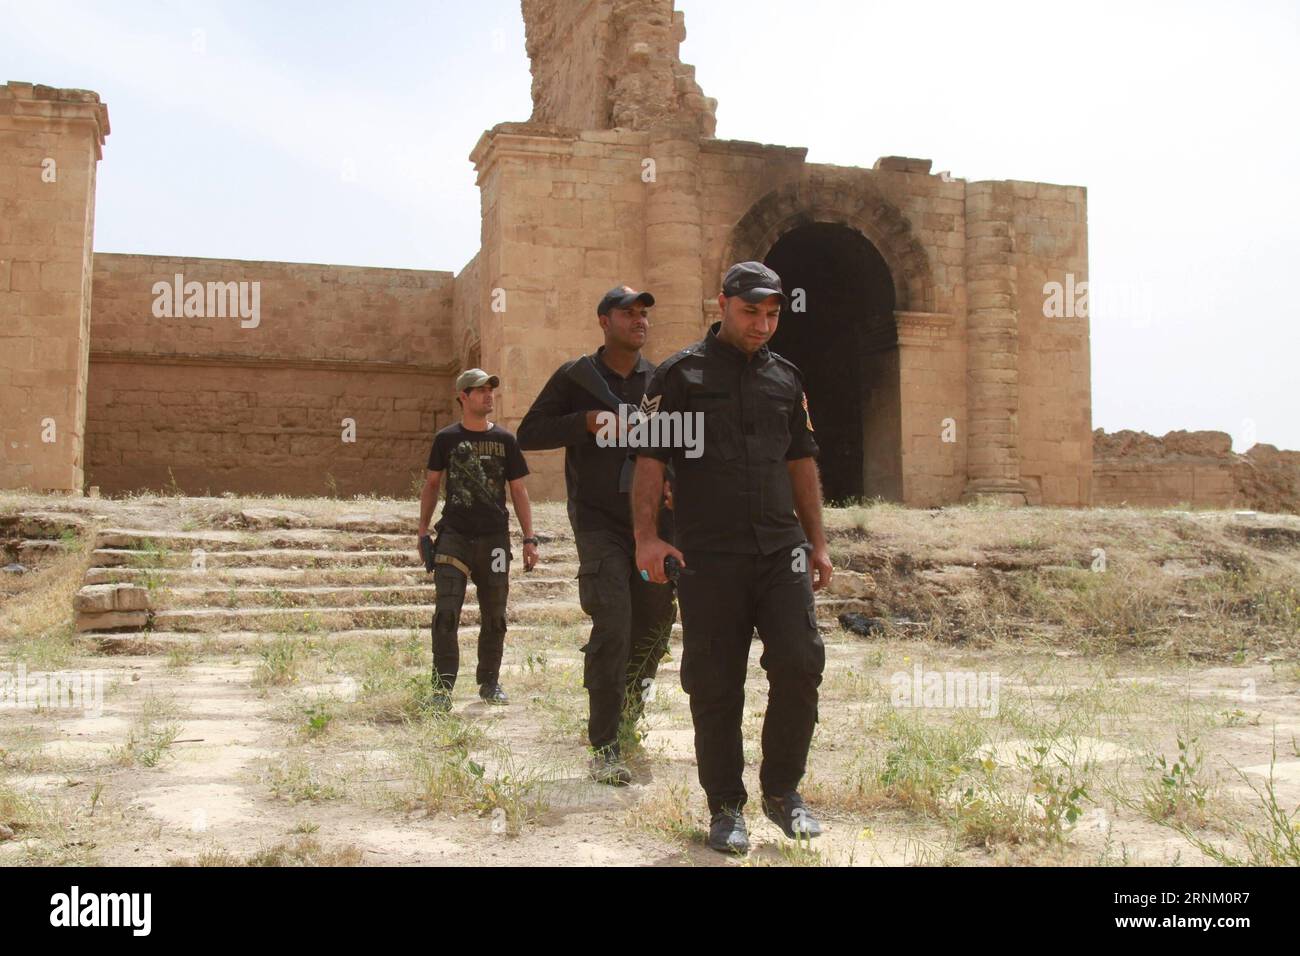 (170428) -- BAGHDAD, April 28, 2017 -- Iraqi paramilitary soldiers patrol at the ancient Hatra city in the south of Nineveh province, Iraq, on April 28, 2017. Iraqi paramilitary units, known as Hashd Shaabi, on Wednesday retook control of ancient remains of the Hatra city in south of Iraq s northern province of Nineveh after clashes with Islamic State (IS) militants, the paramilitary units said. ) IRAQ-NINEVEH-ANCIENT SITE OF HATRA-IRAQI FORCES-SEIZING YaserxJawad PUBLICATIONxNOTxINxCHN   Baghdad April 28 2017 Iraqi paramilitary Soldiers Patrol AT The Ancient Hatra City in The South of Nineveh Stock Photo